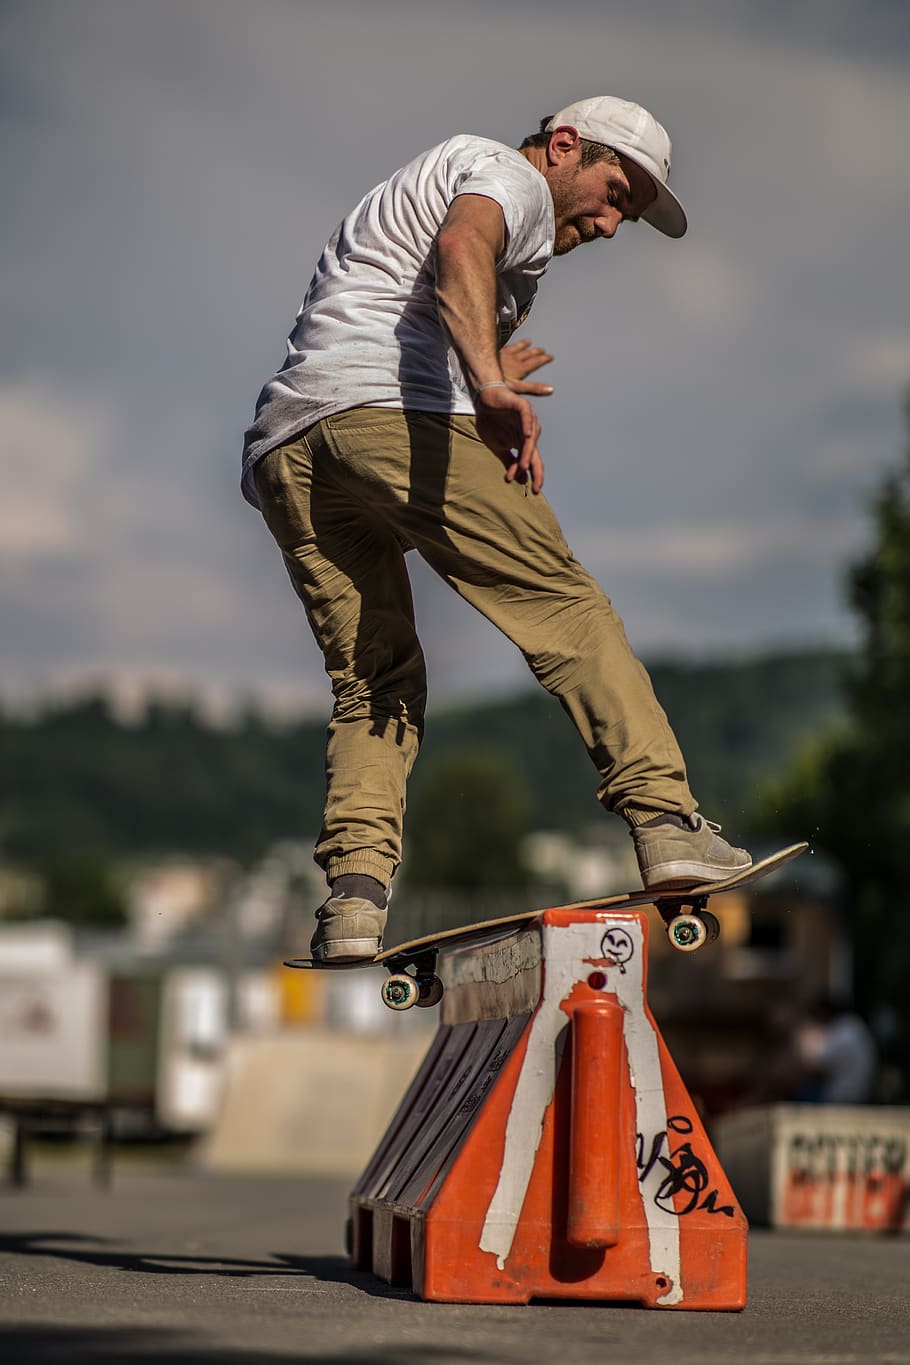 Person Doing Trick on Skateboard, action, balance, blurred background, HD wallpaper